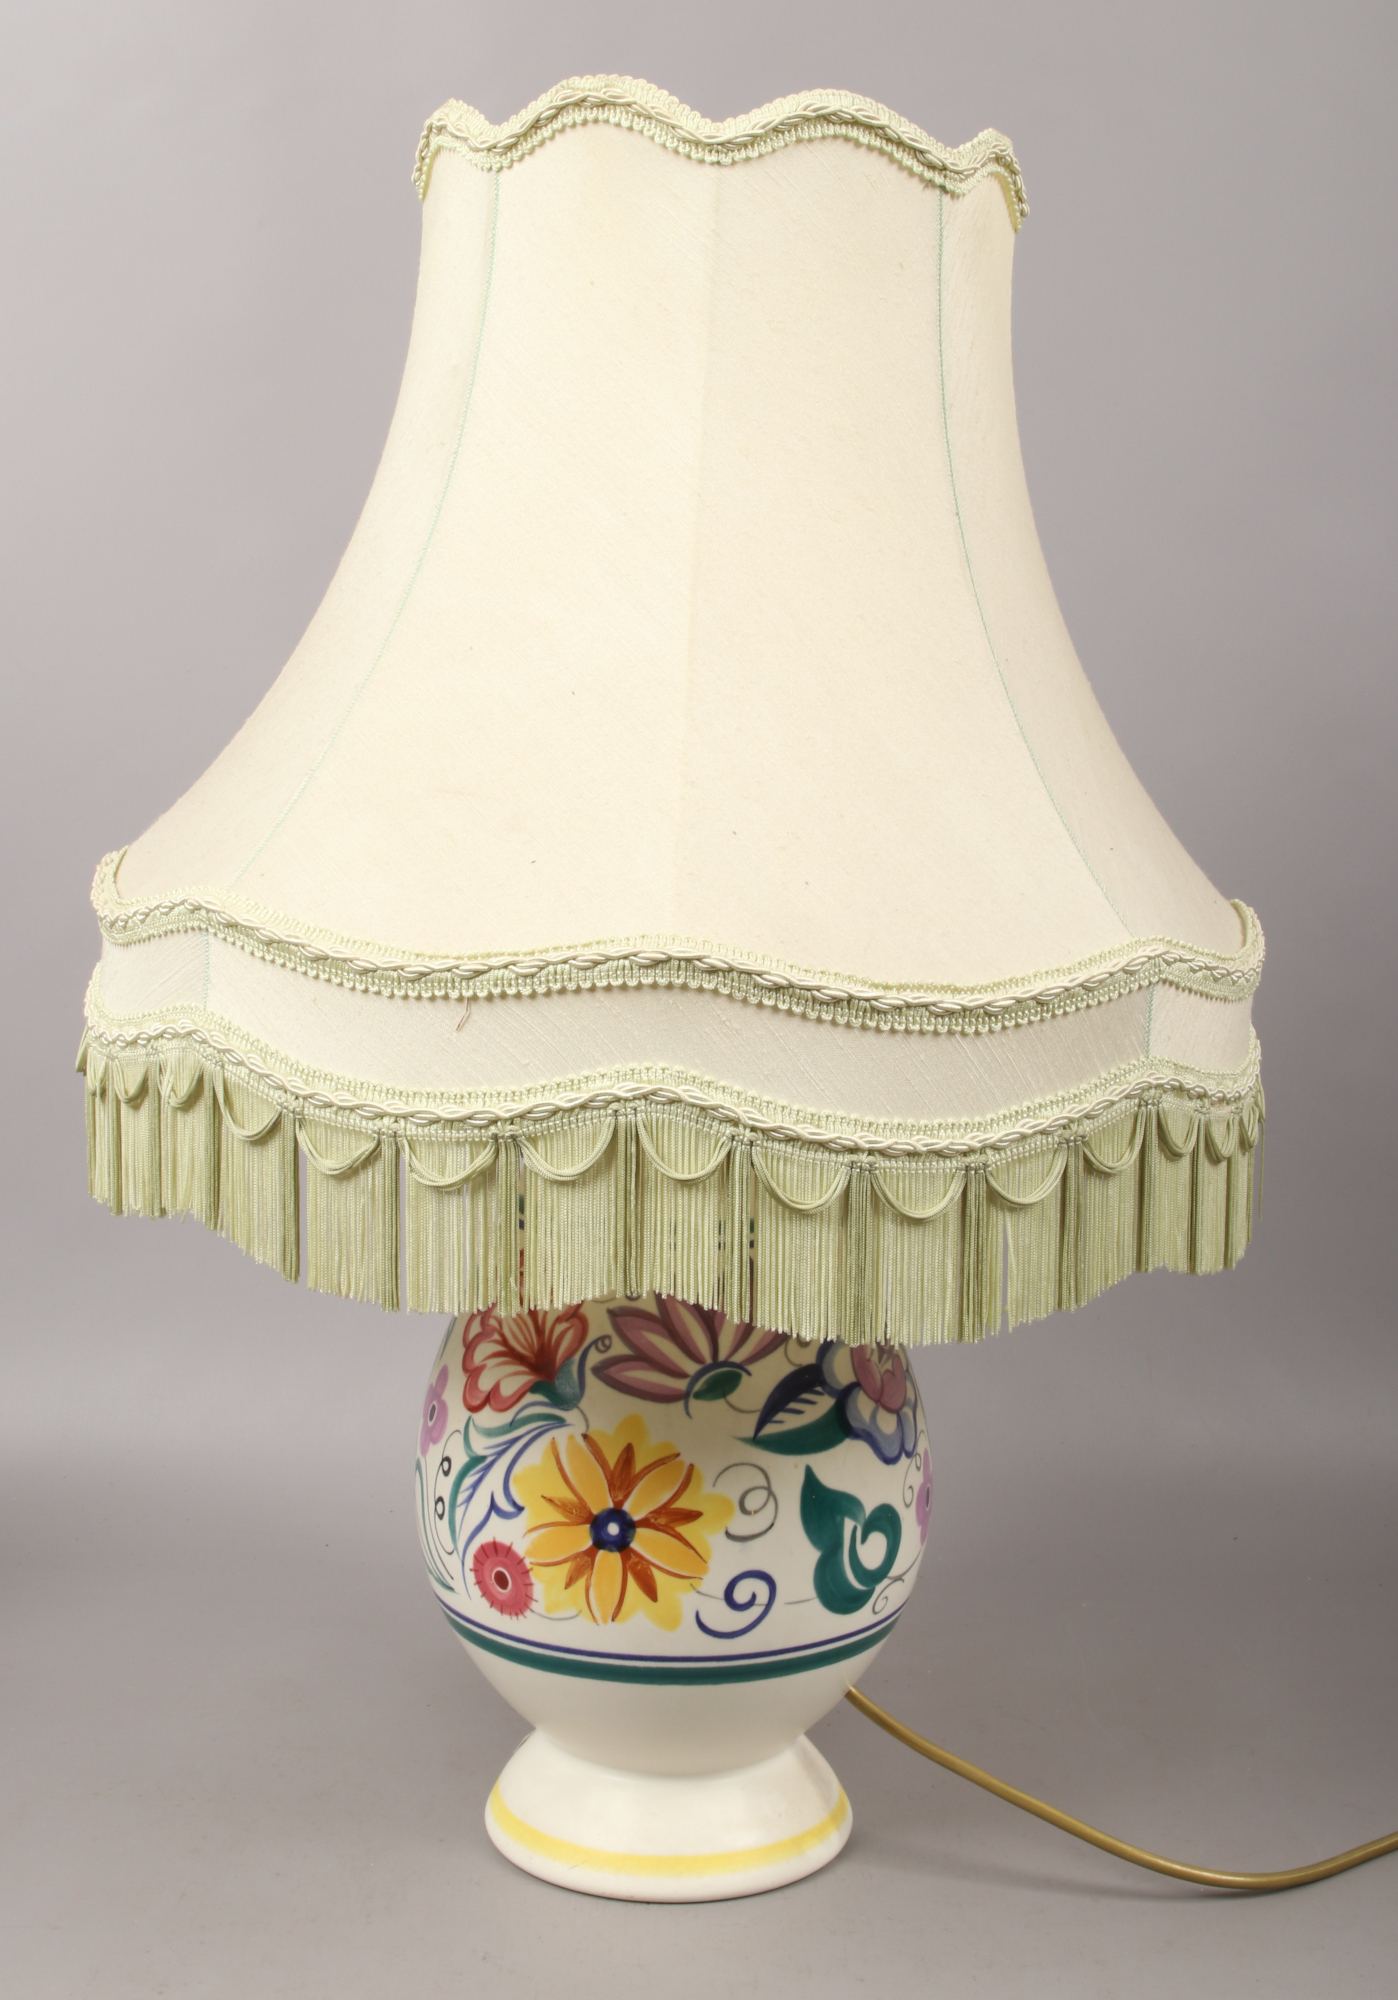 A large Poole pottery table lamp, lamp base height 33cm.